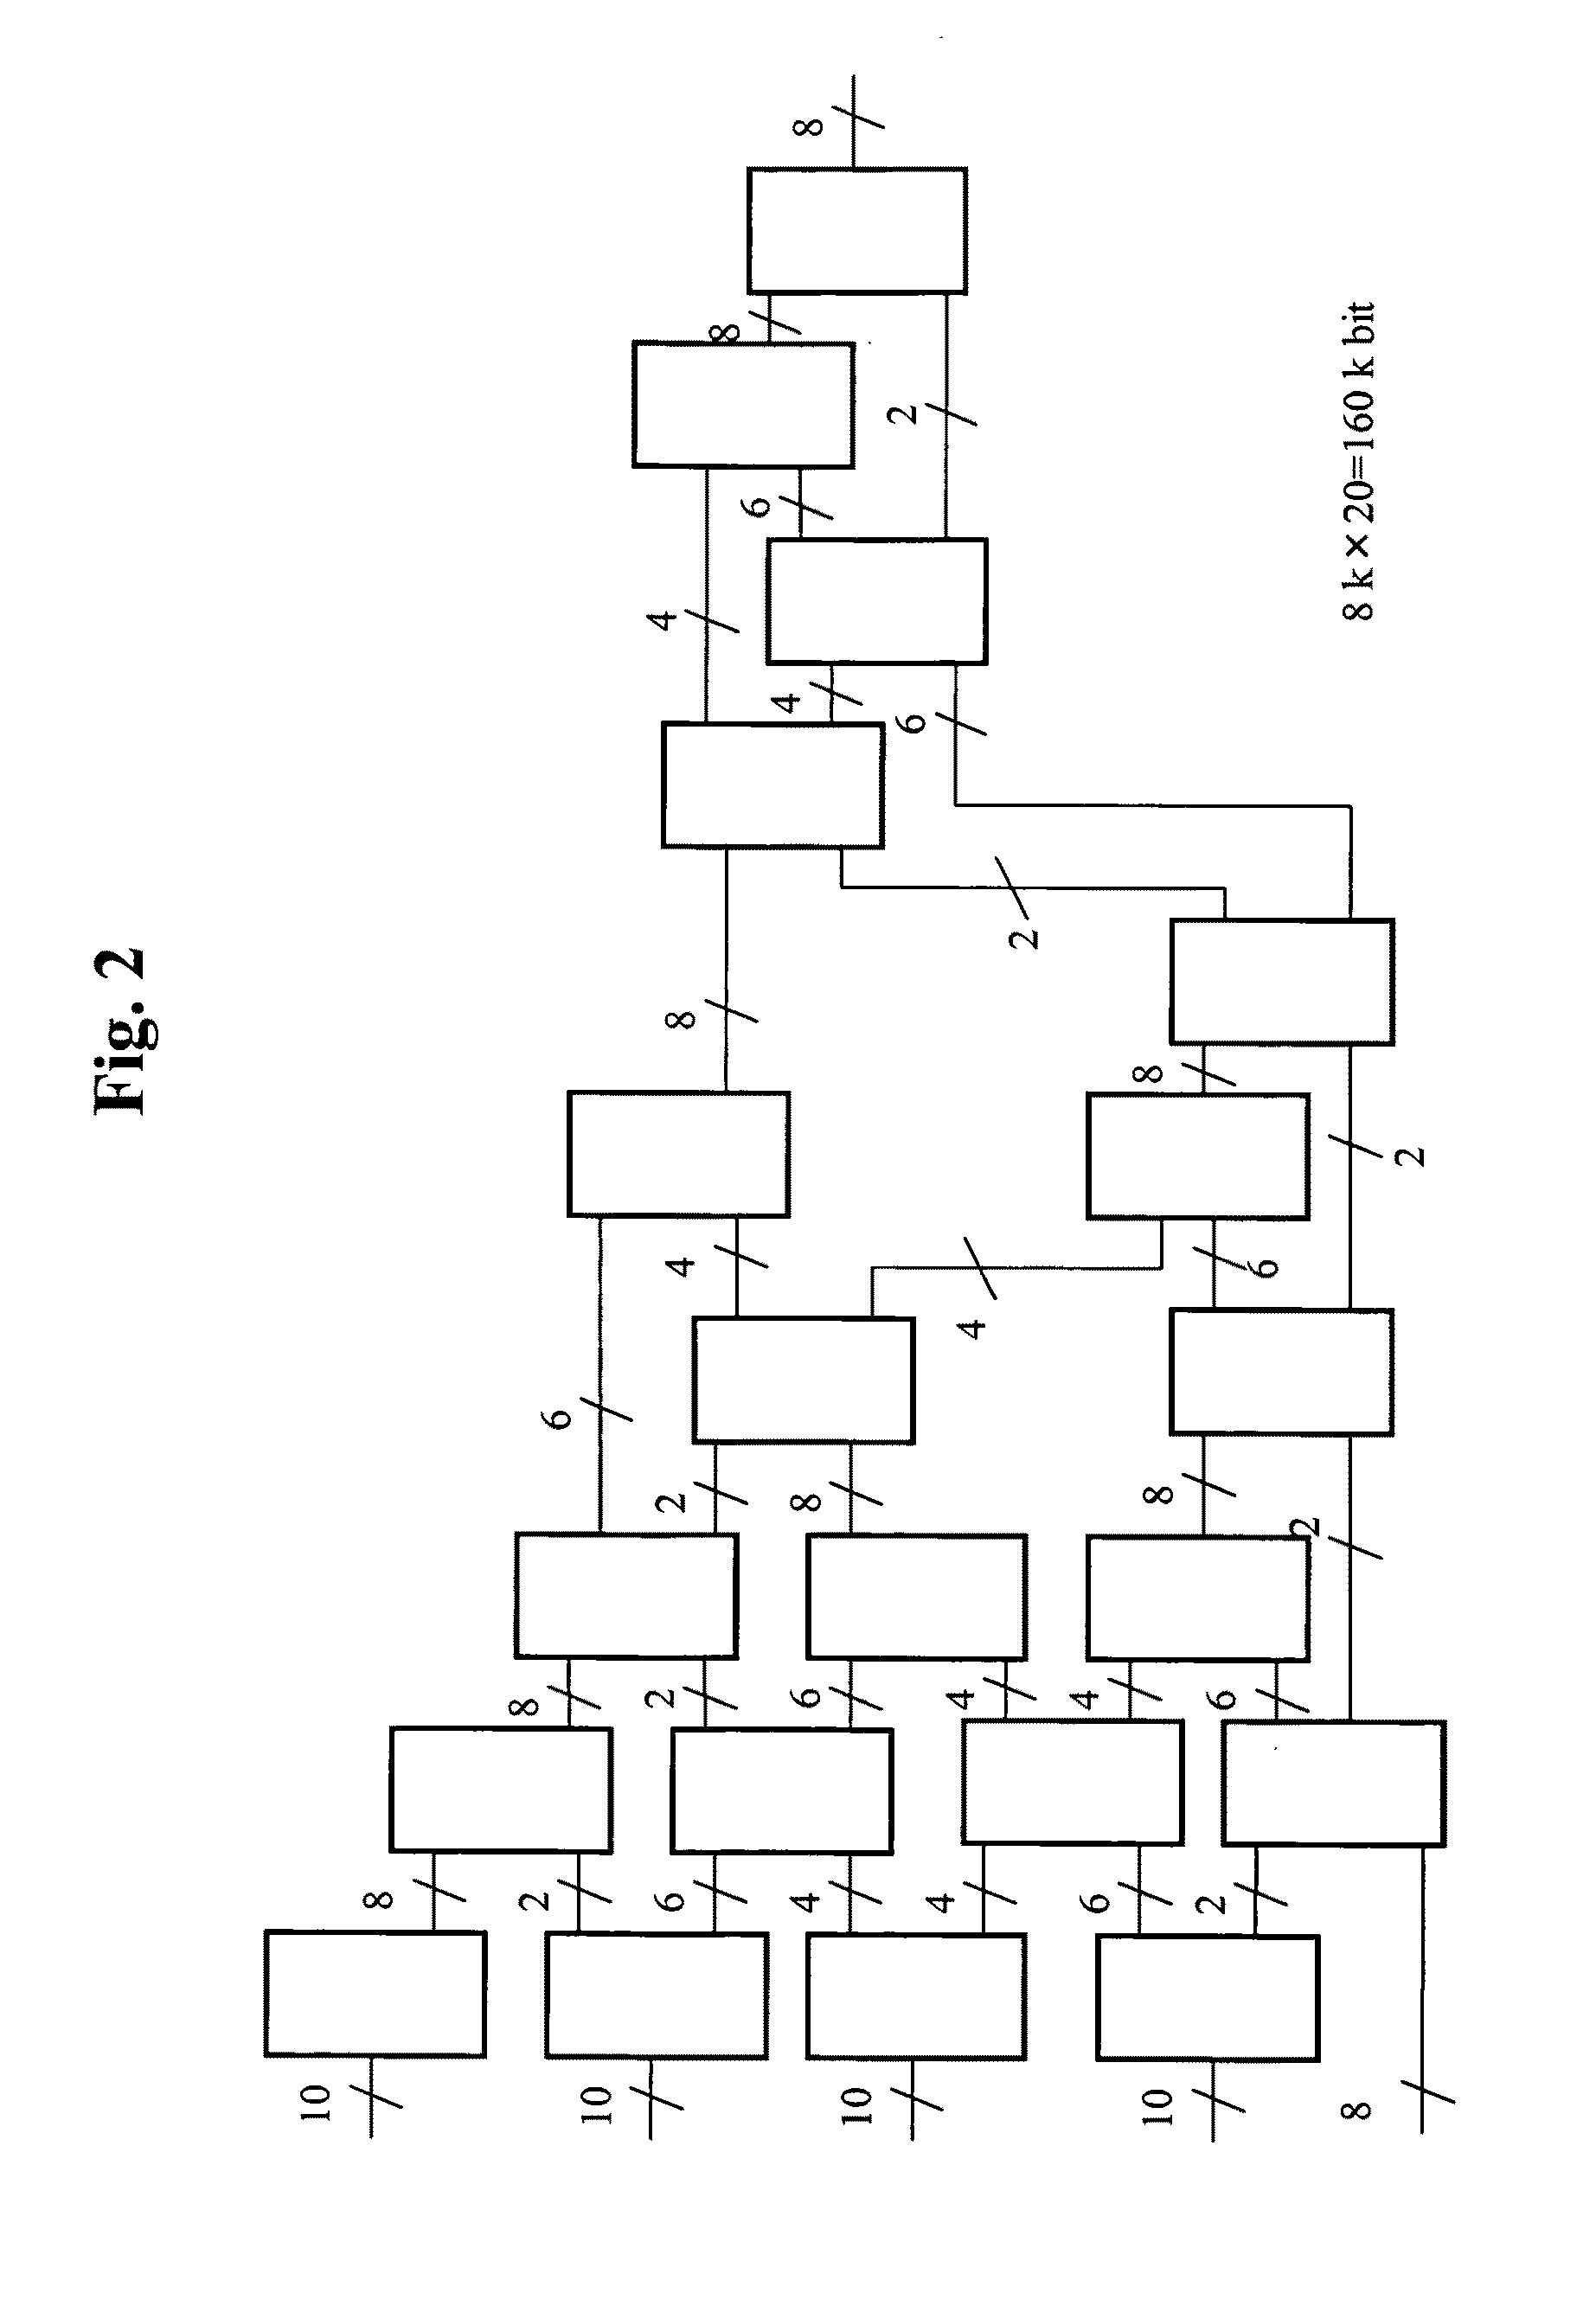 Multi-stage reconfiguration device and reconfiguration method, logic circuit correction device, and reconfigurable multi-stage logic circuit